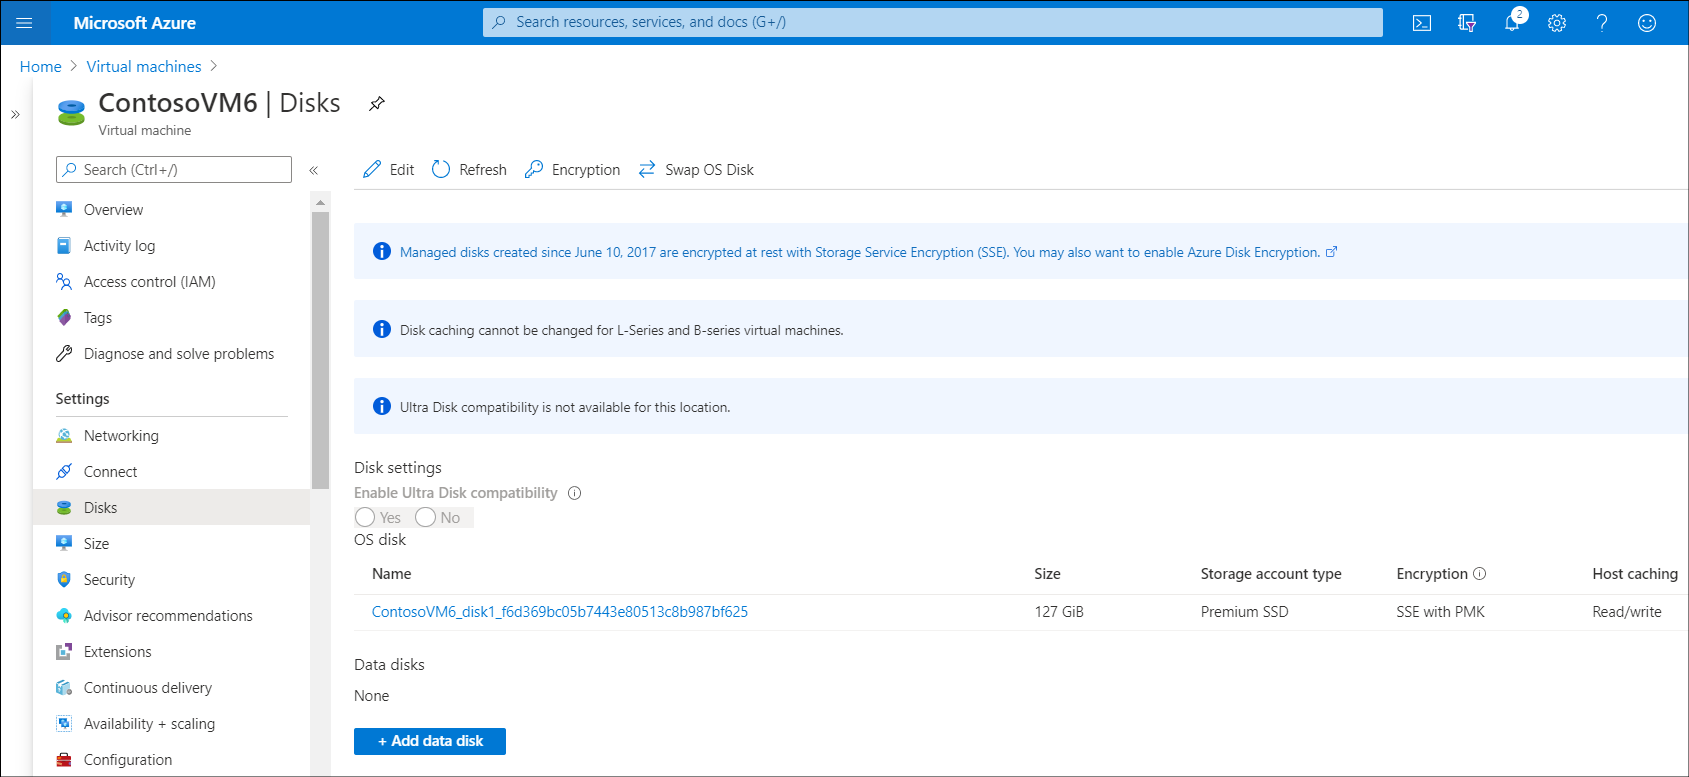 A screenshot of the Disks blade in the Azure portal for a VM named ContosoVM6.